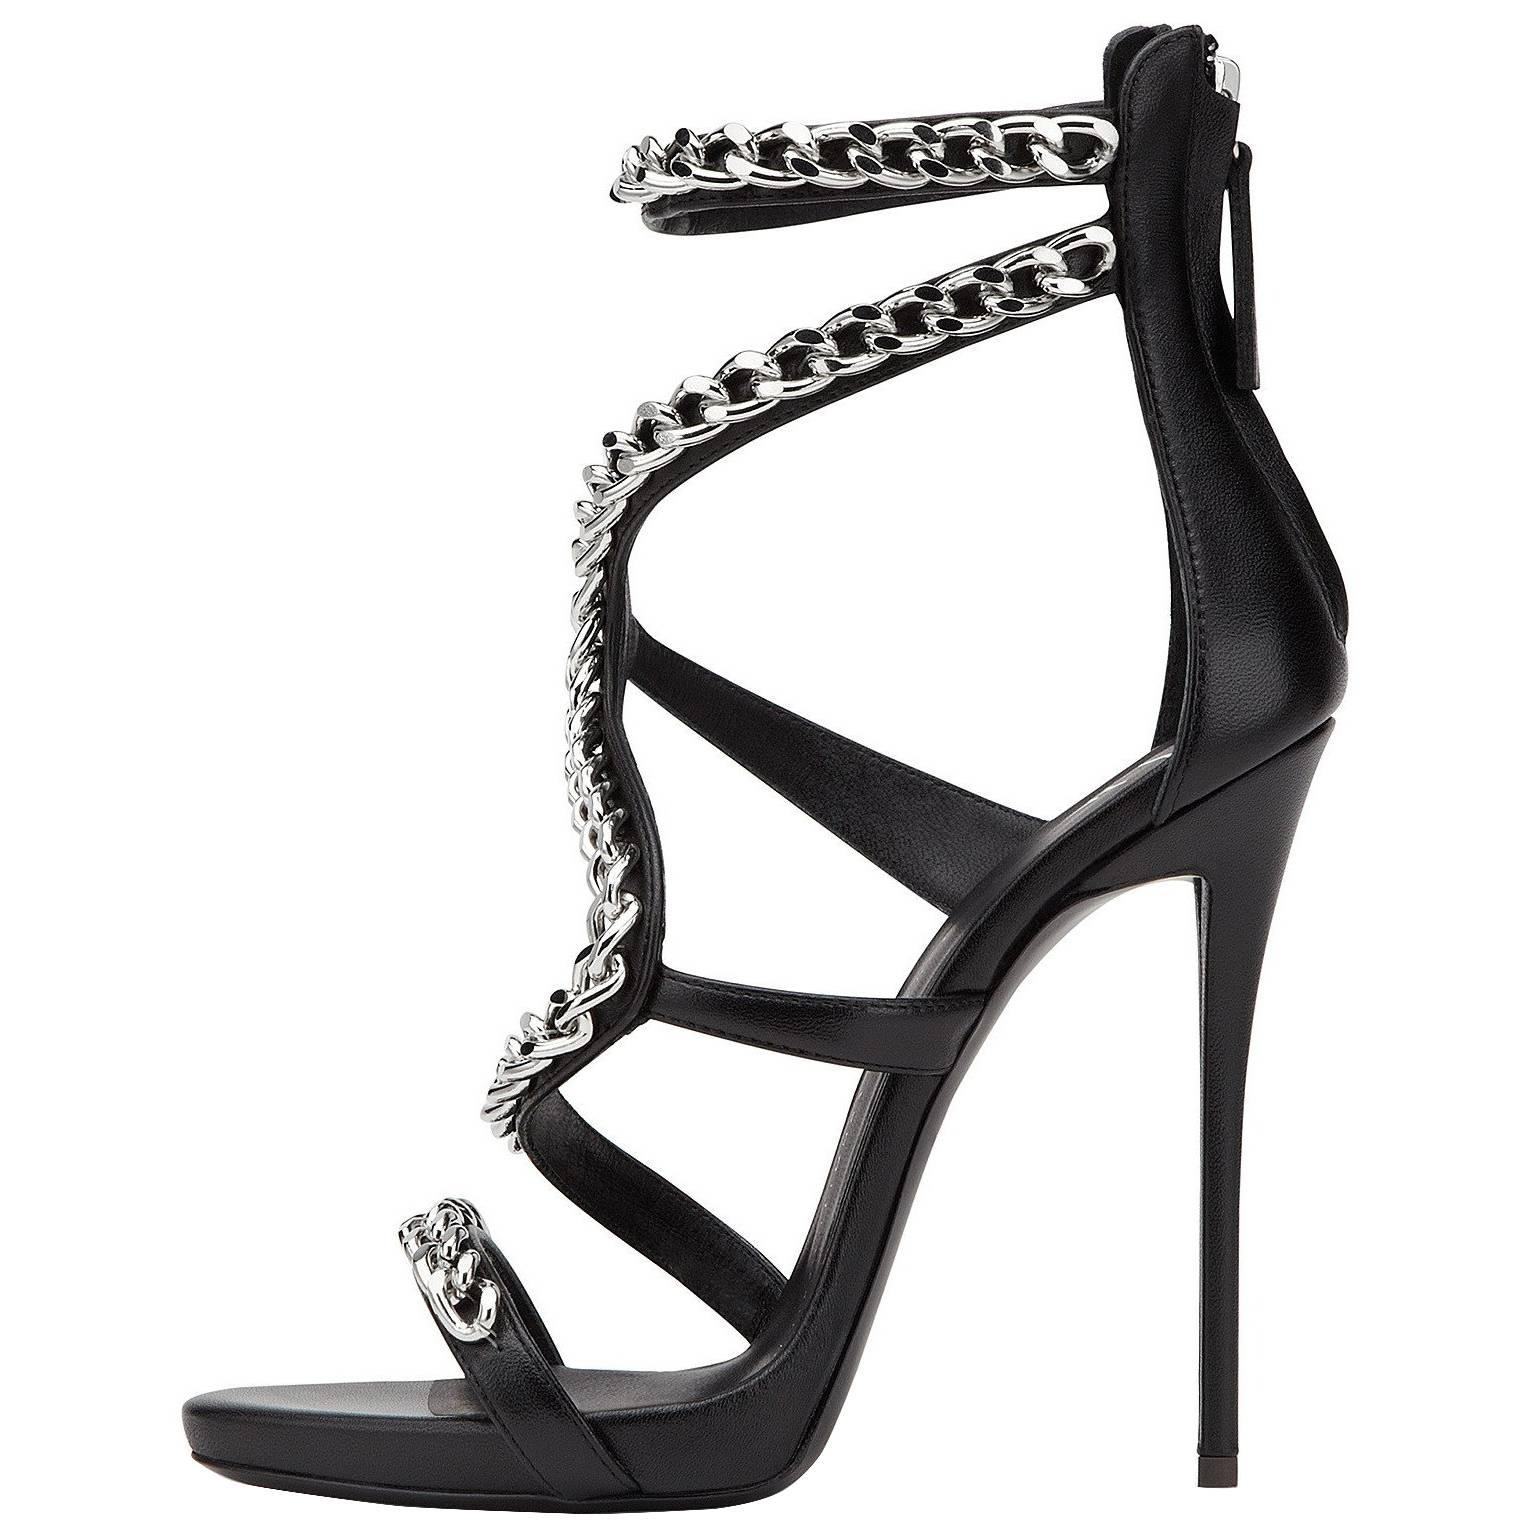 Gisuseppe Zanotti New Sold Out Black Leather Silver Chain Sandals Heels in Box